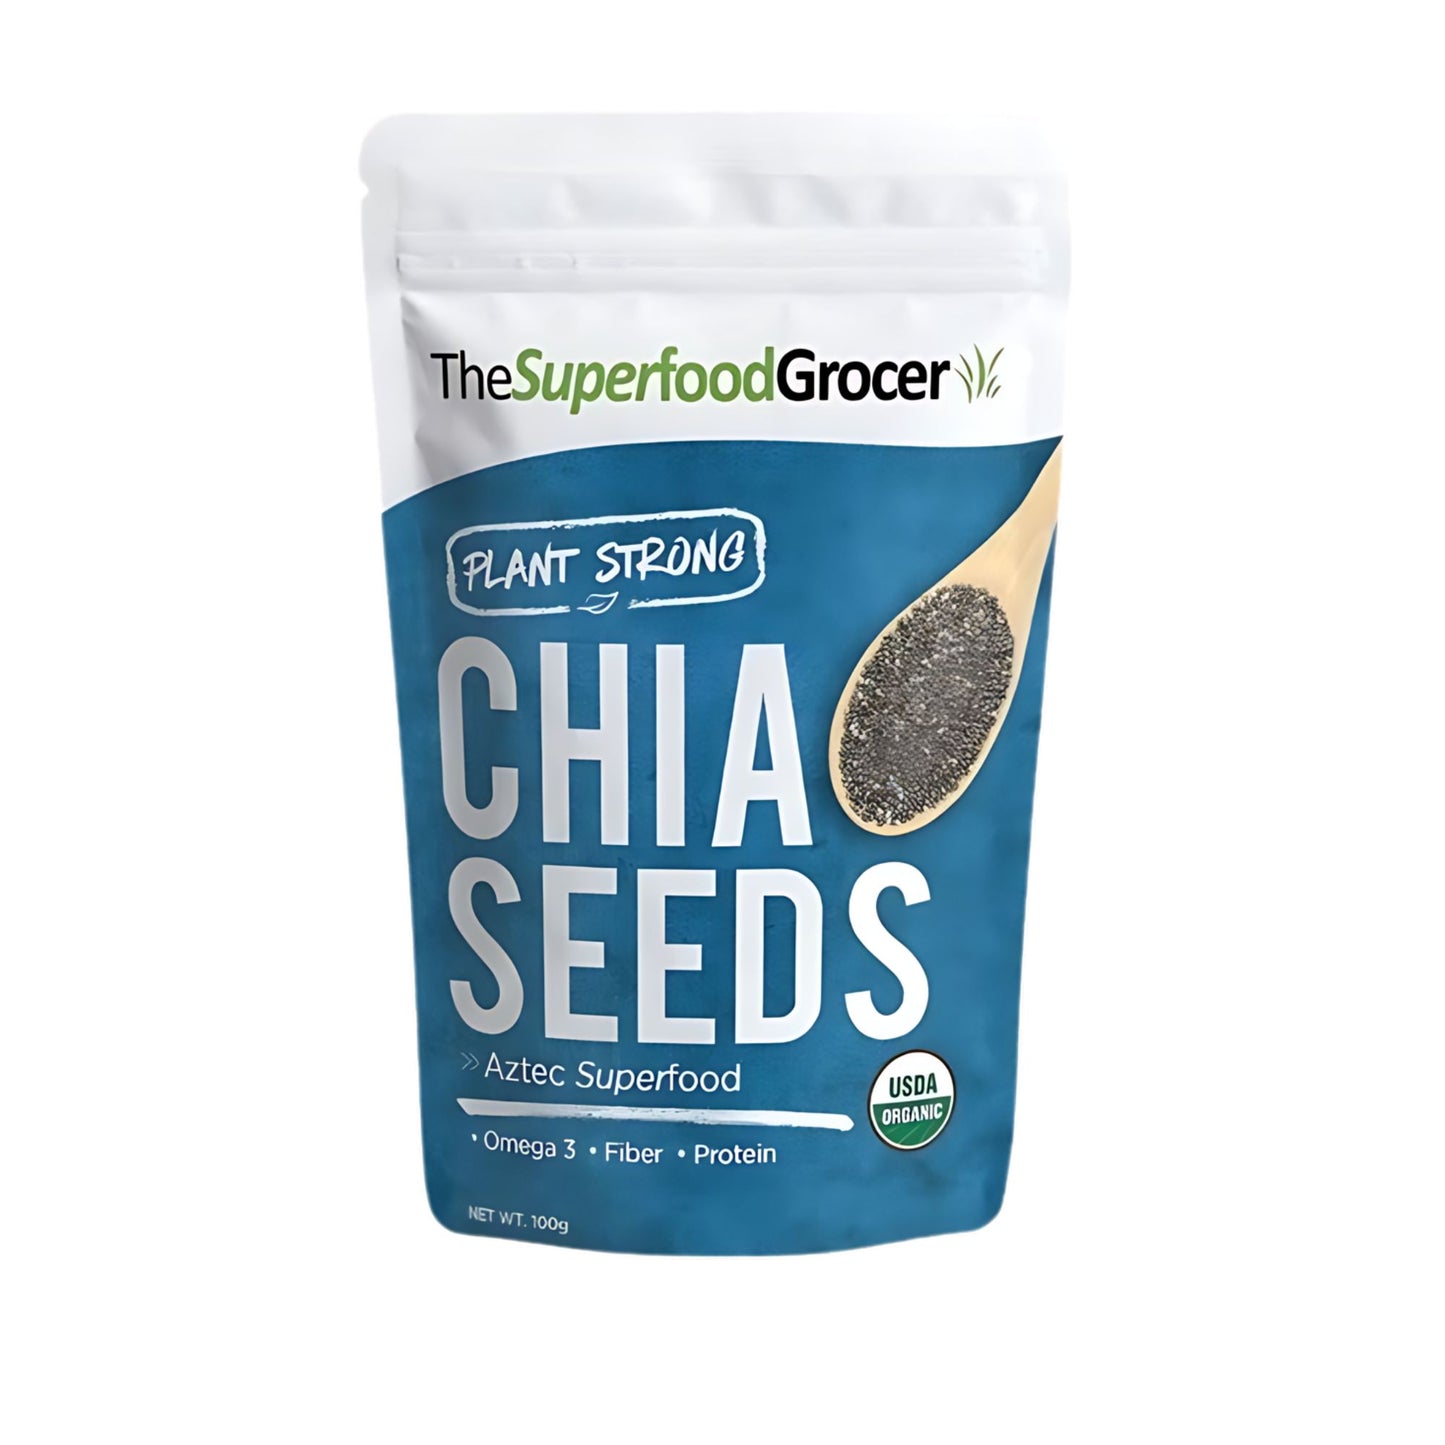 The Superfood Grocer Organic Black Chia Seeds